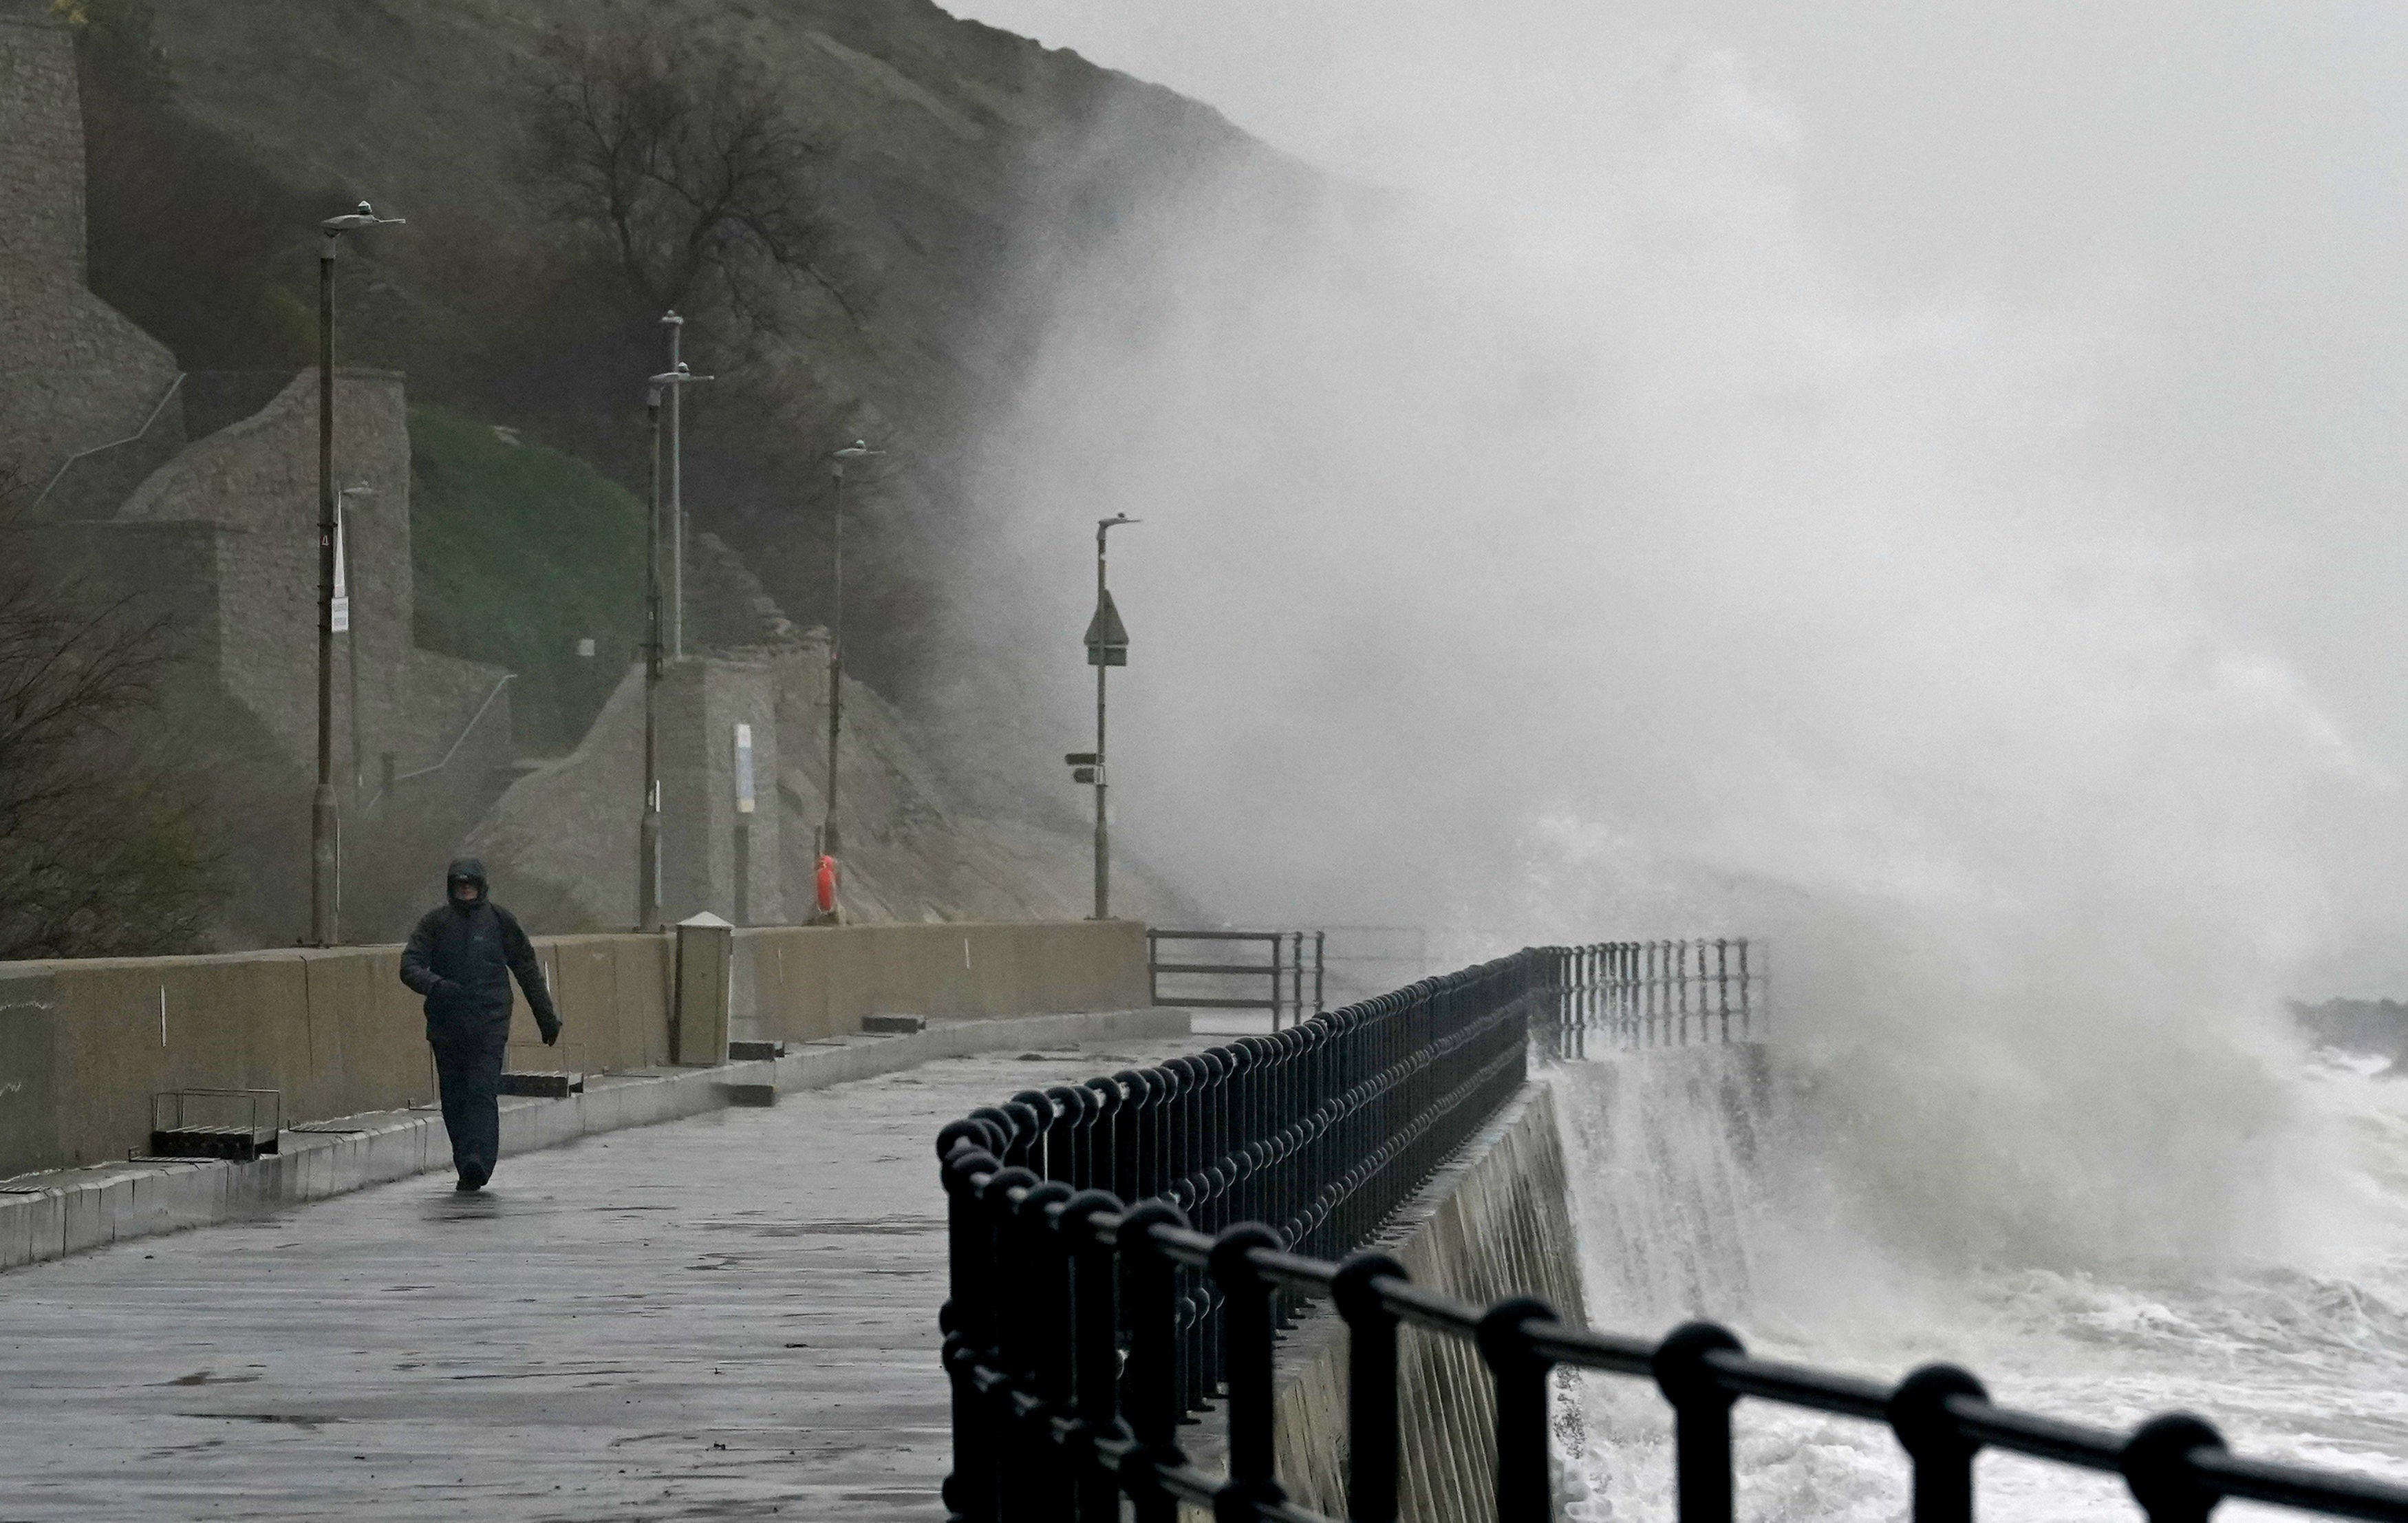 Strong winds are expected in northwestern Scotland